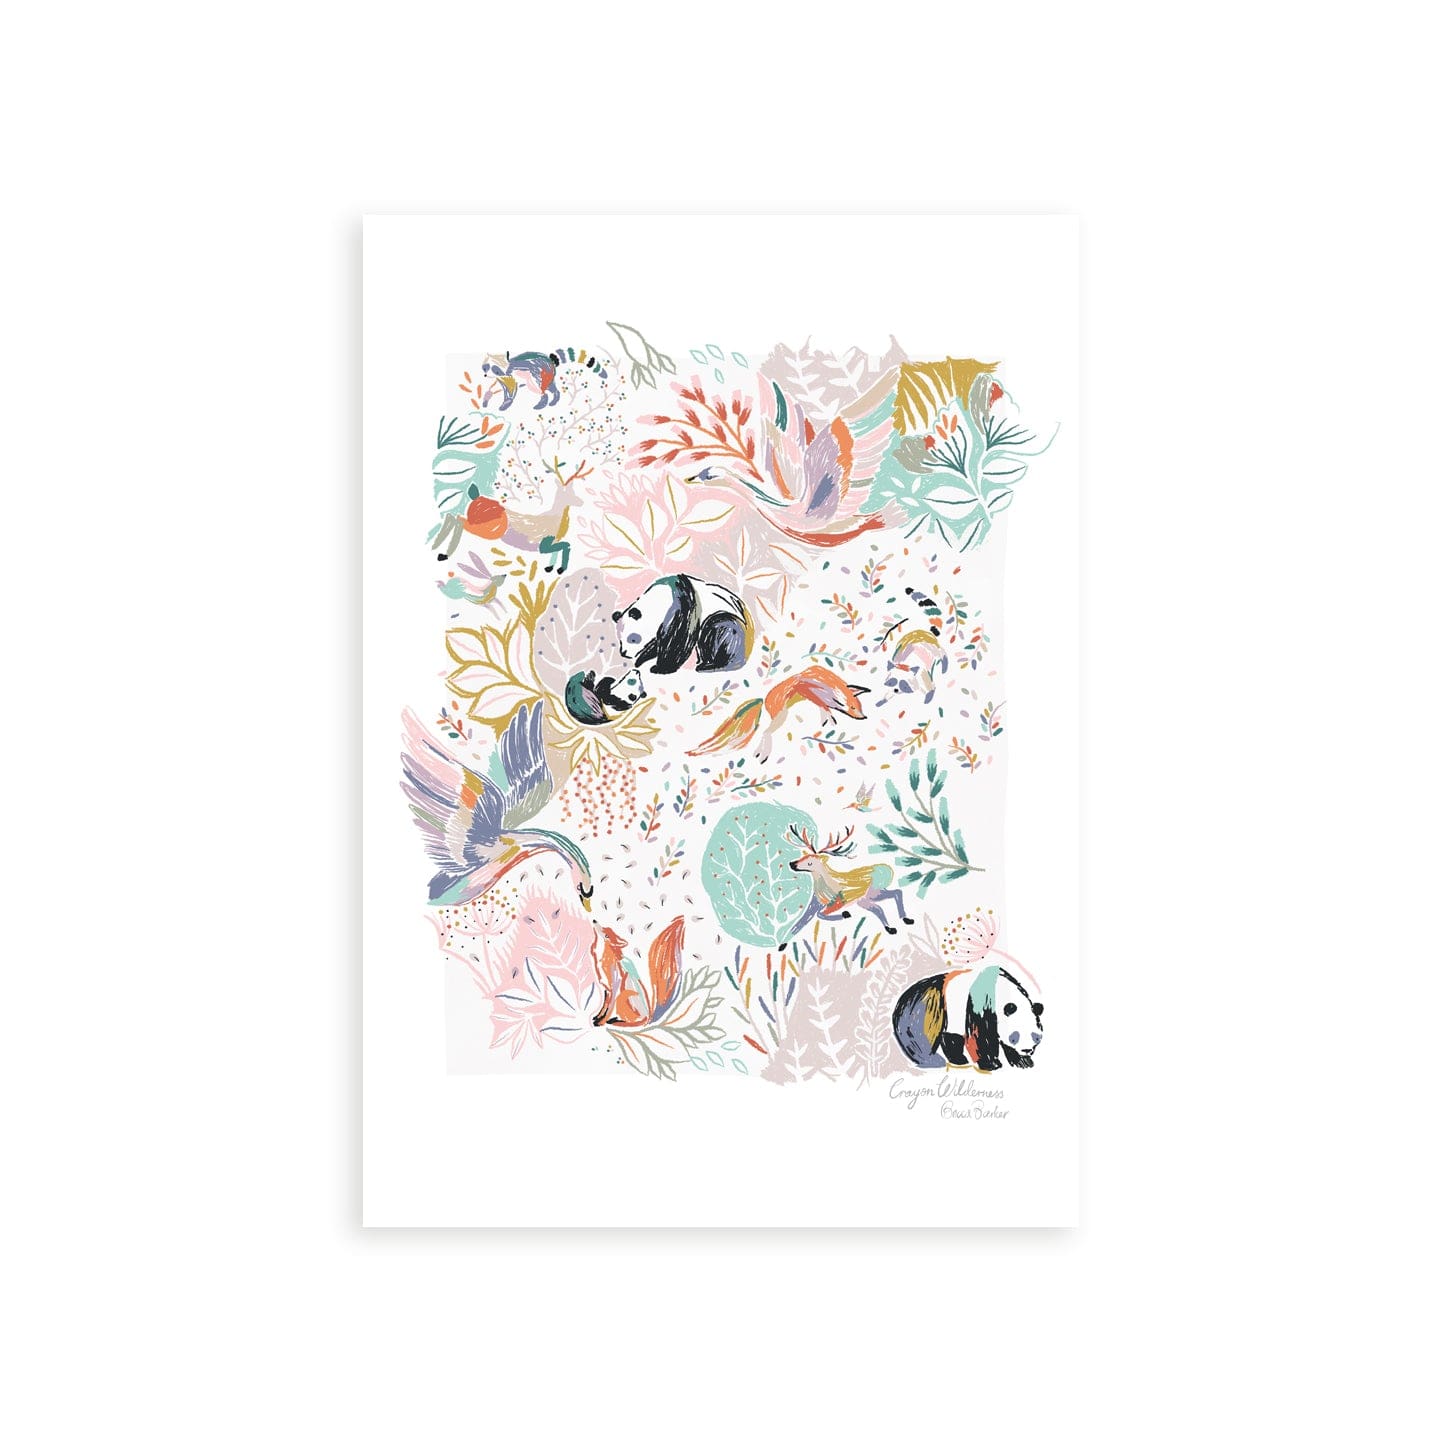 Our Crayon Wilderness Art print is hand-drawn with floral details in greens and pinks, with pop of brighter colours, with animals featuring pandas, swans, foxes, deer and raccoons, creating a whimsical woodland feel.